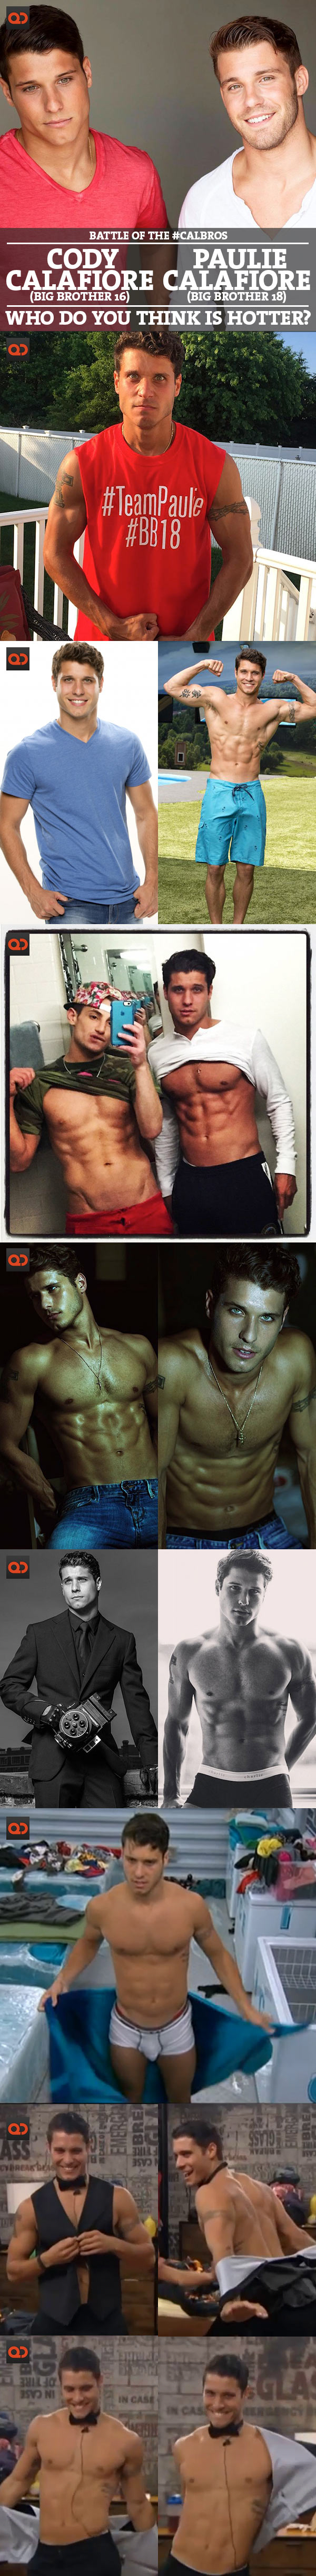 qc-battle_of_the_calbros-big_brother_paulie_calafiore_cody_calafiore_naked-collage01